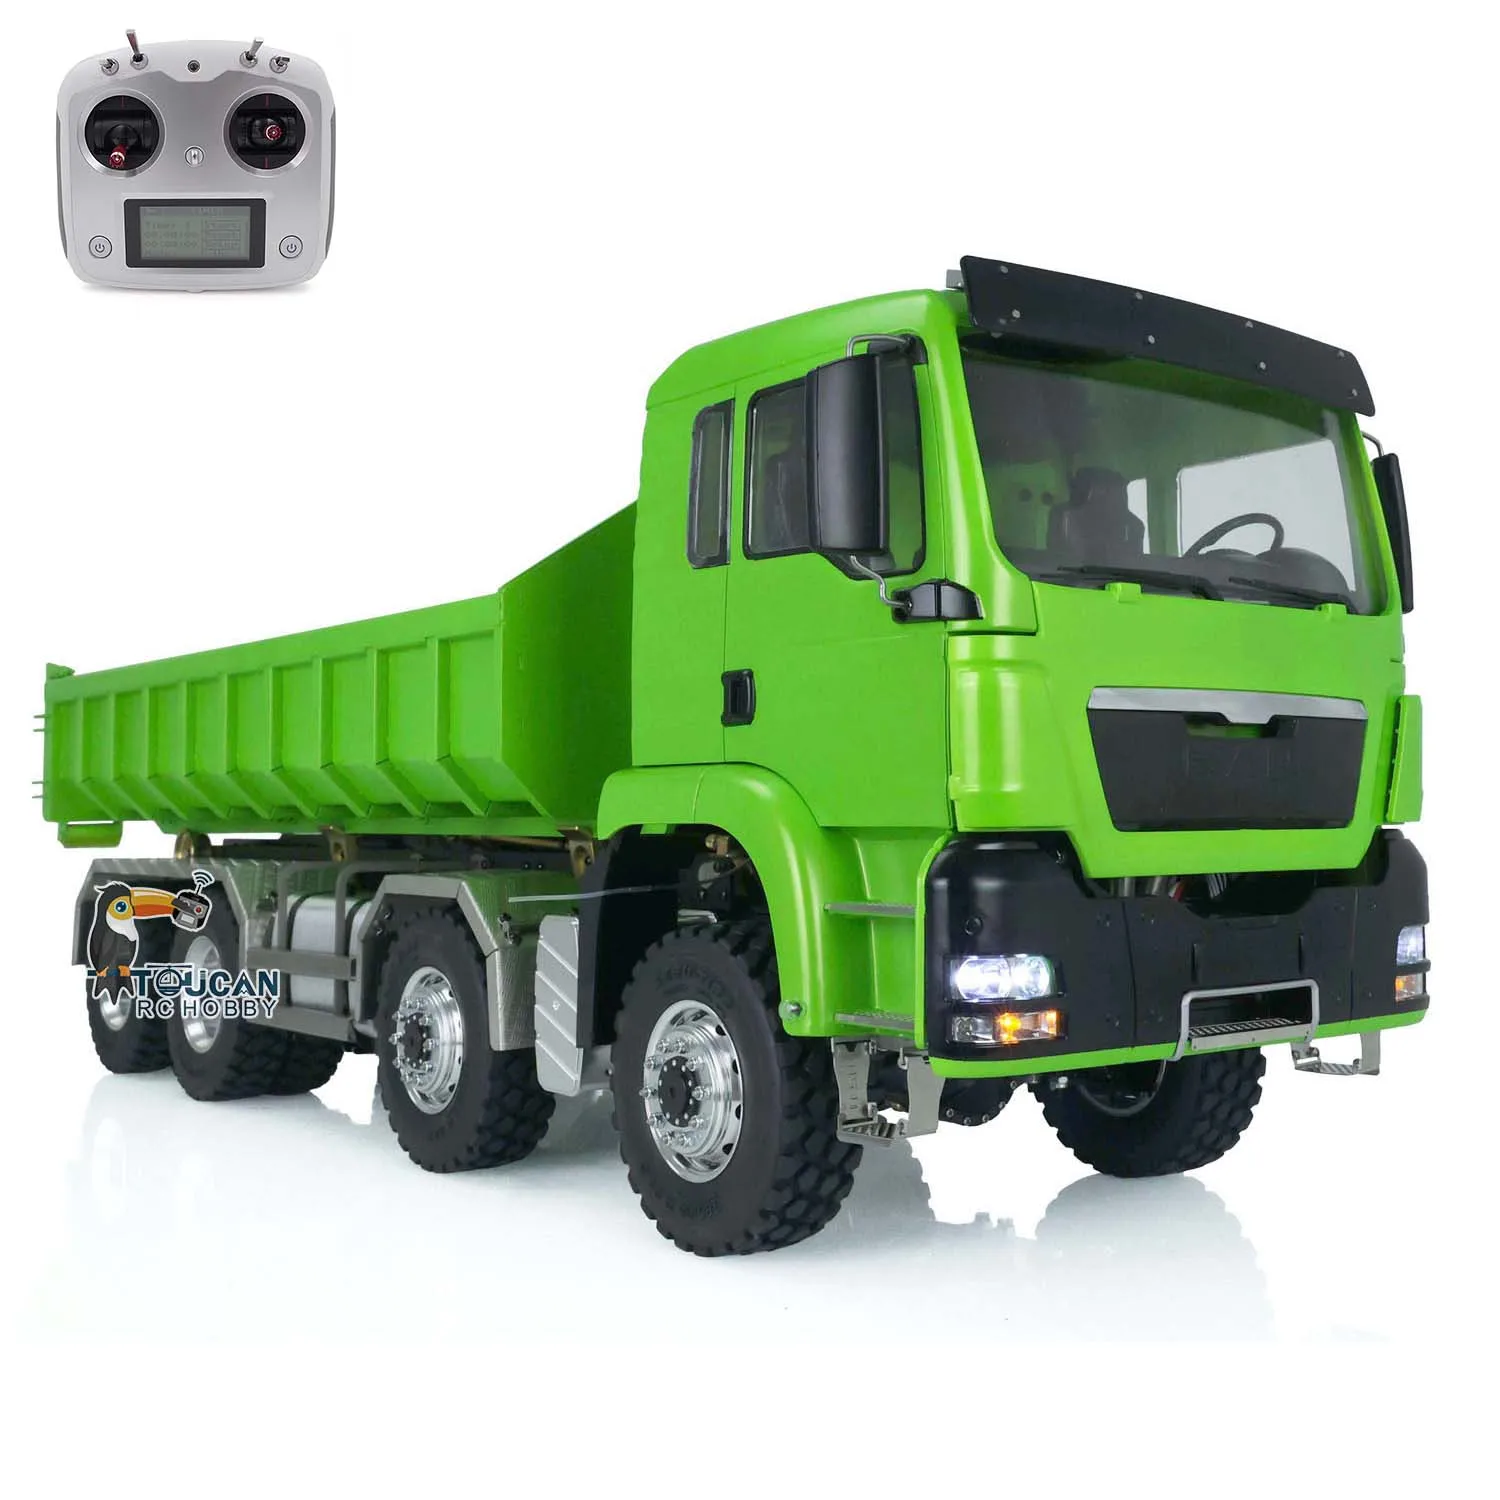 

LESU 1/14 RC Roll On/Off Tipper Truck for MAN TGS 8x8 Hydraulic Dumper Car Toucan Light Sound Remoted Model THZH1428-SMT8